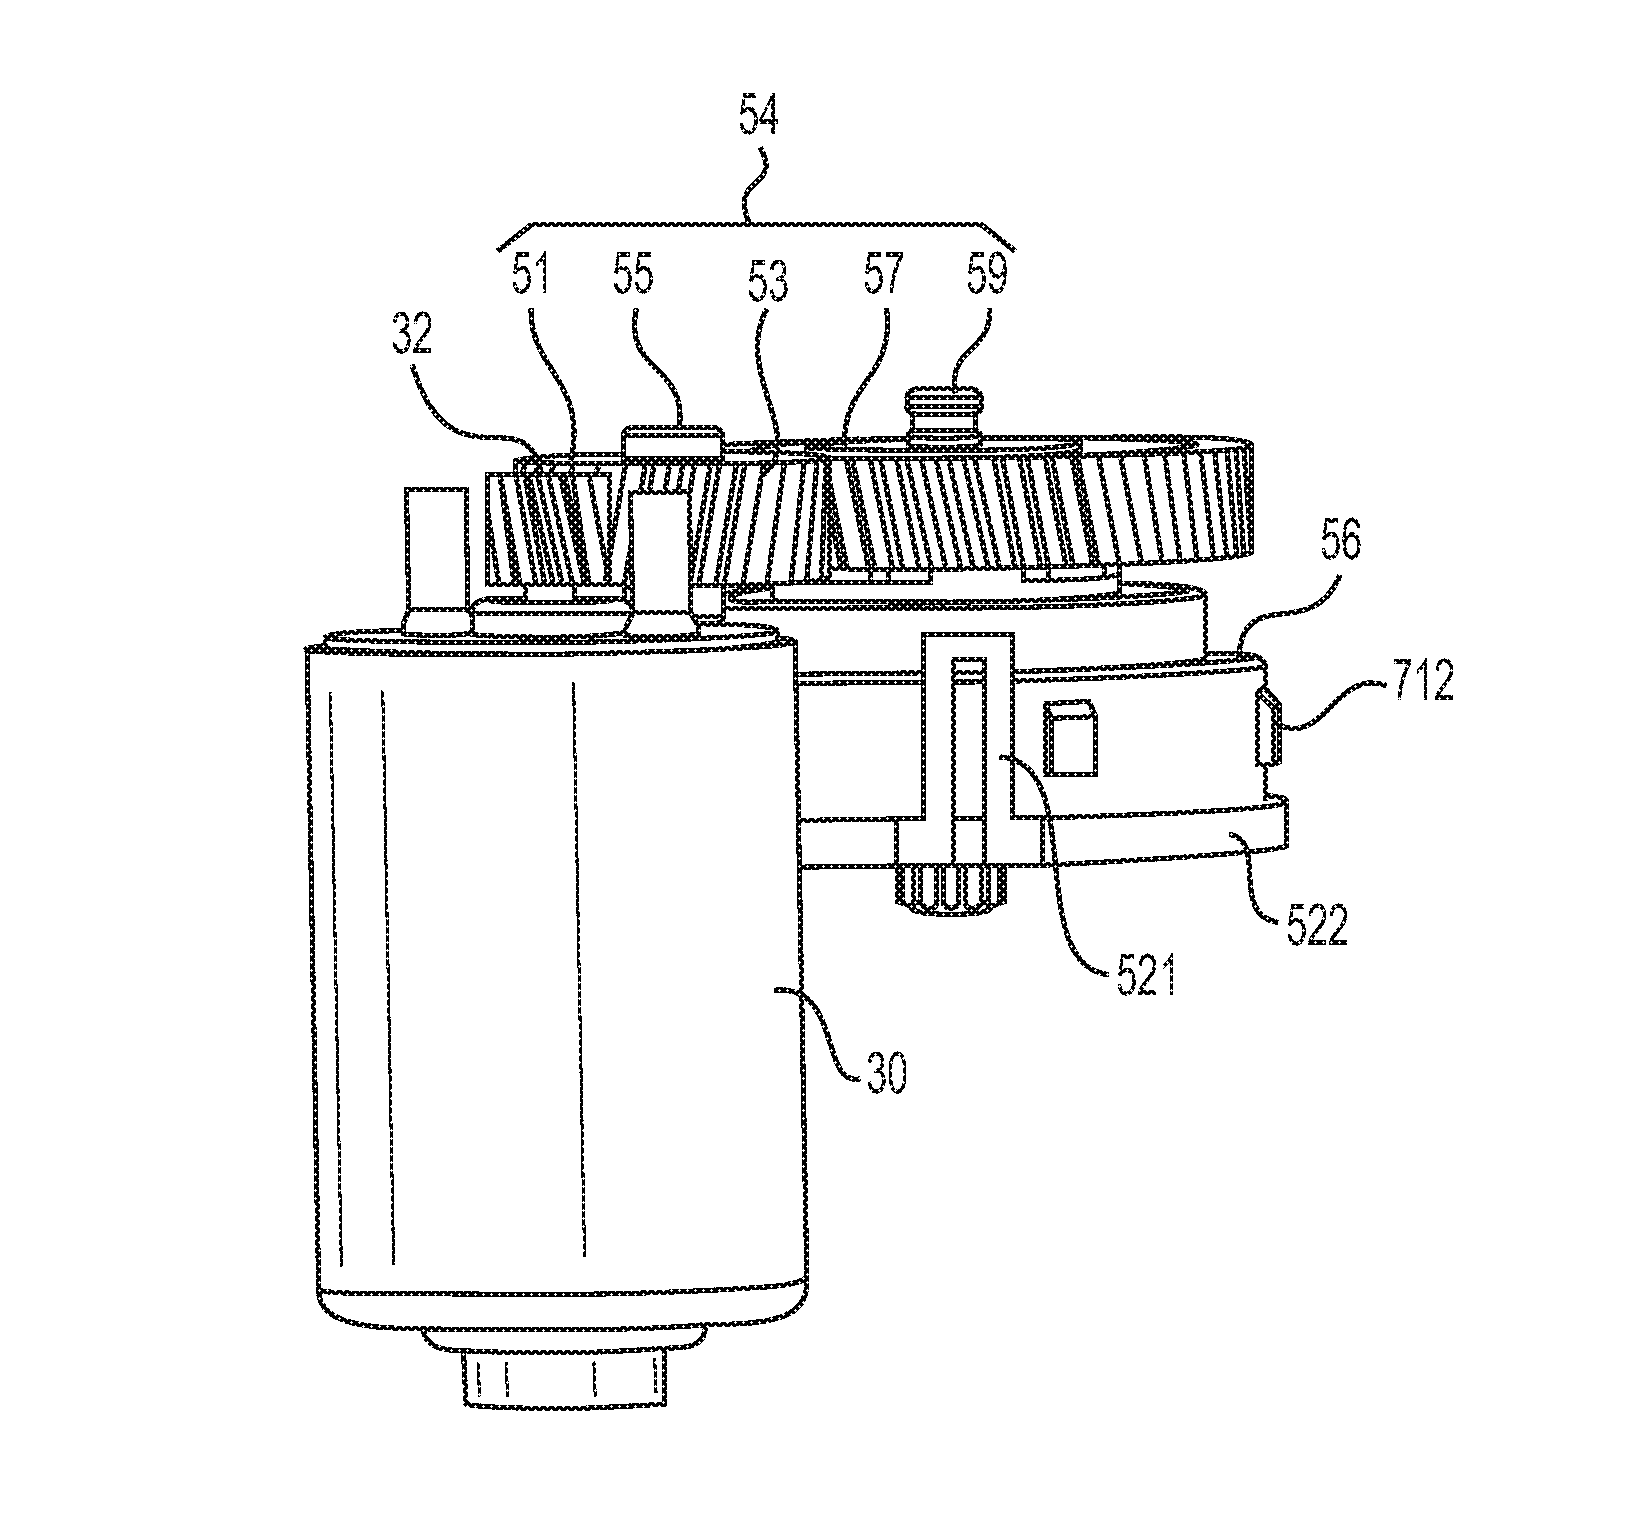 Actuator for Electric Park Brake System and Self-locking Mechanism Thereof